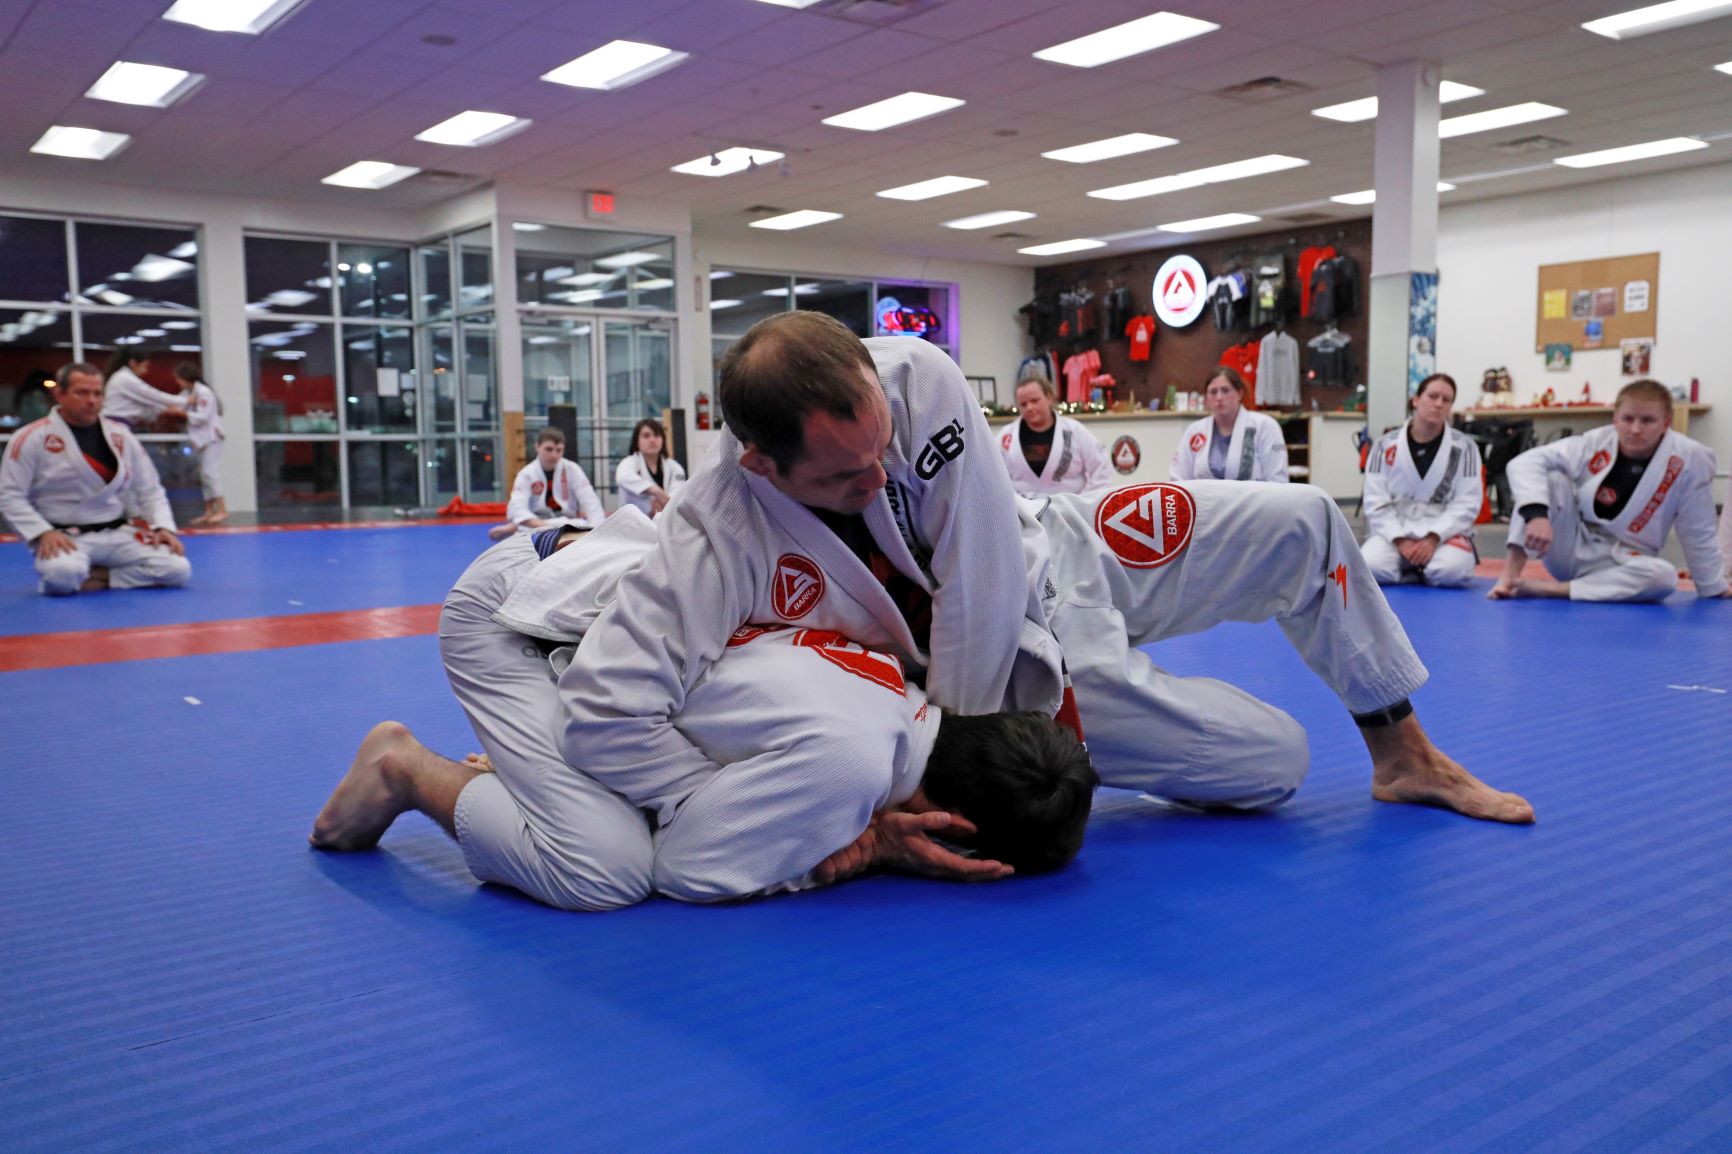 Town and Country, MO BJJ Gym - BJJ gym near Town and Country - Brazilian Jiu Jitsu gym near Town and Country, MO